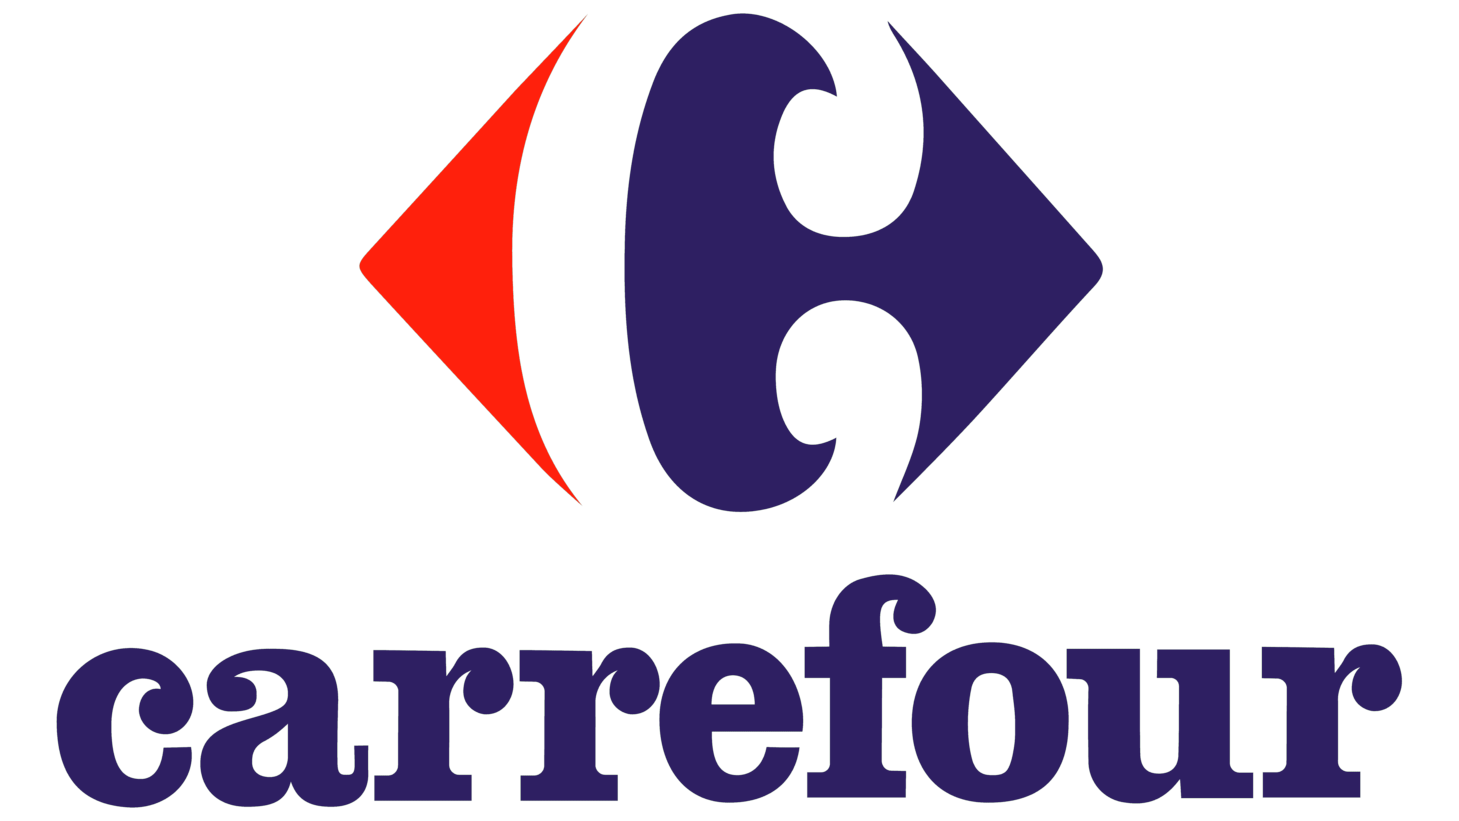 Carrefour sign 1966 1972